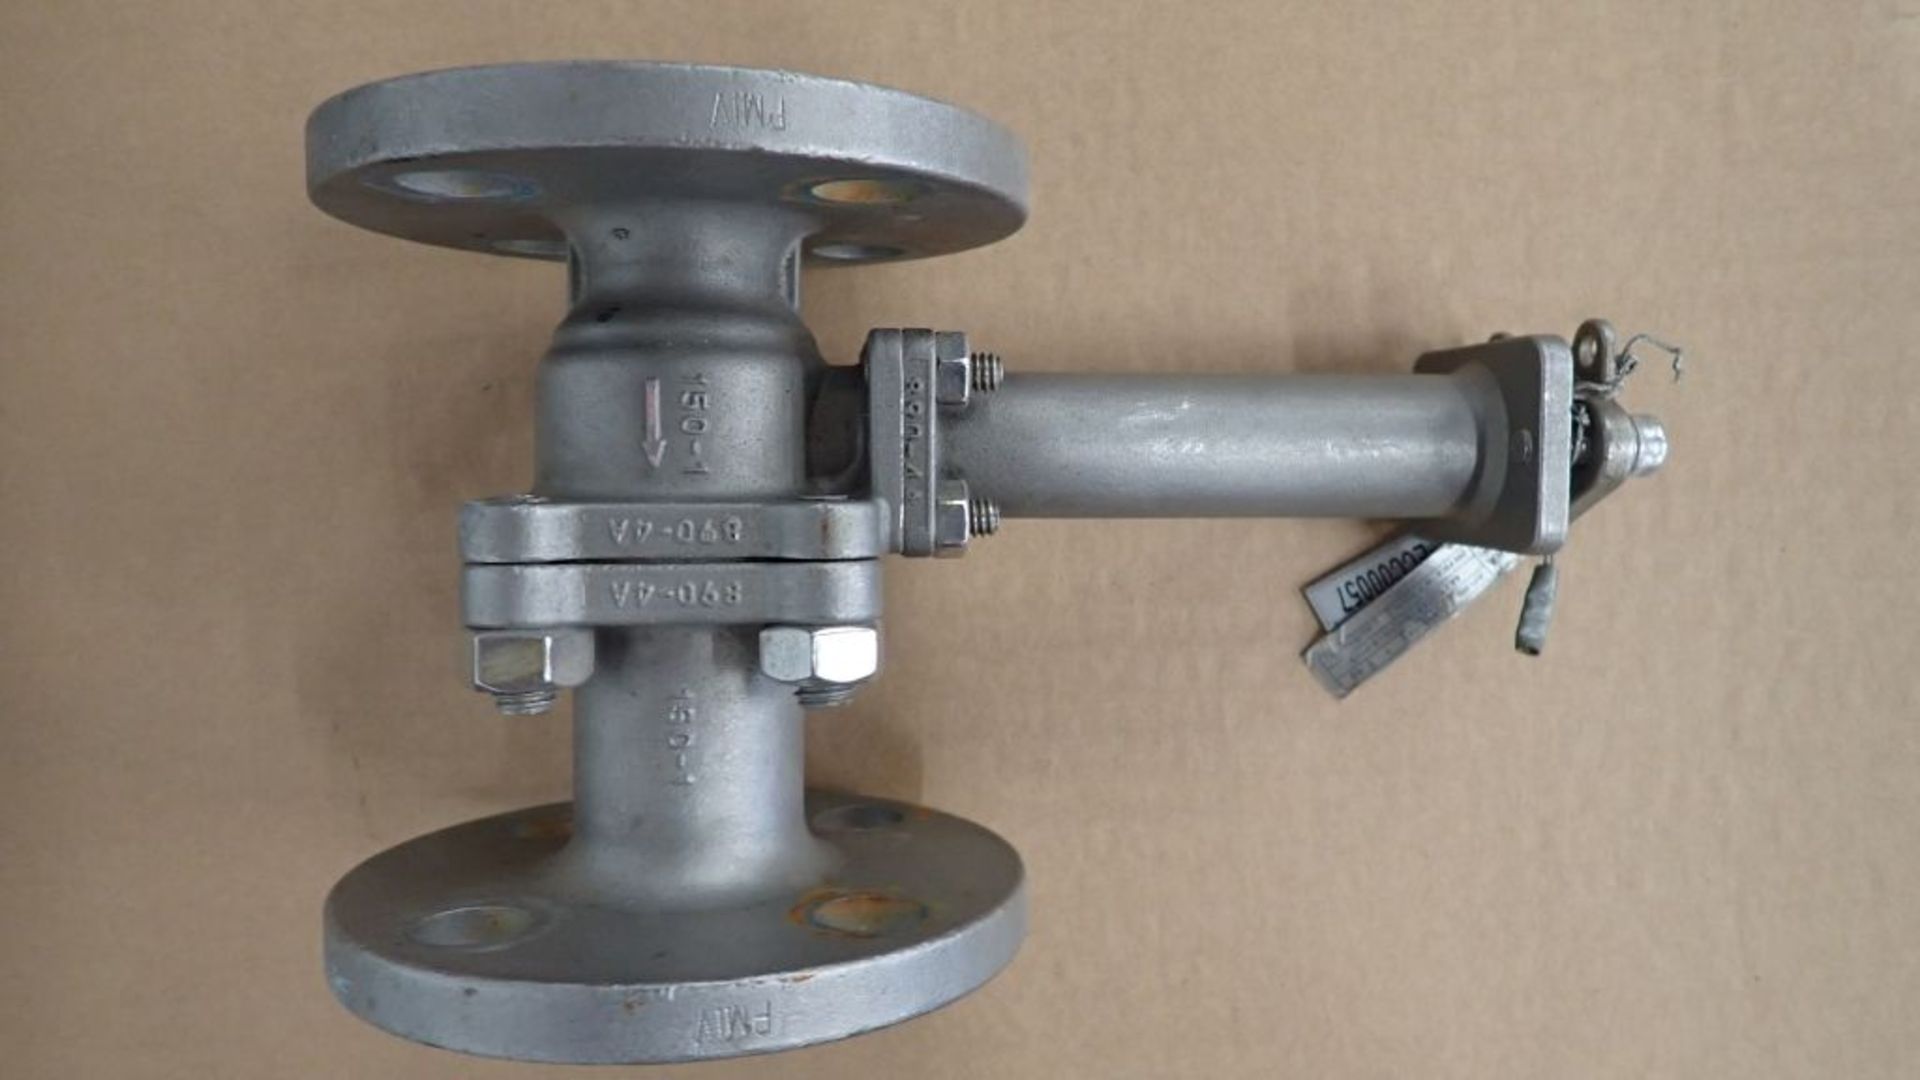 Lot of (5) 1" Type 2205 Stainless Valves | (1) Ladish 1" Class-150, CD3MN Body, 2205 Metal Type; (4) - Image 9 of 11